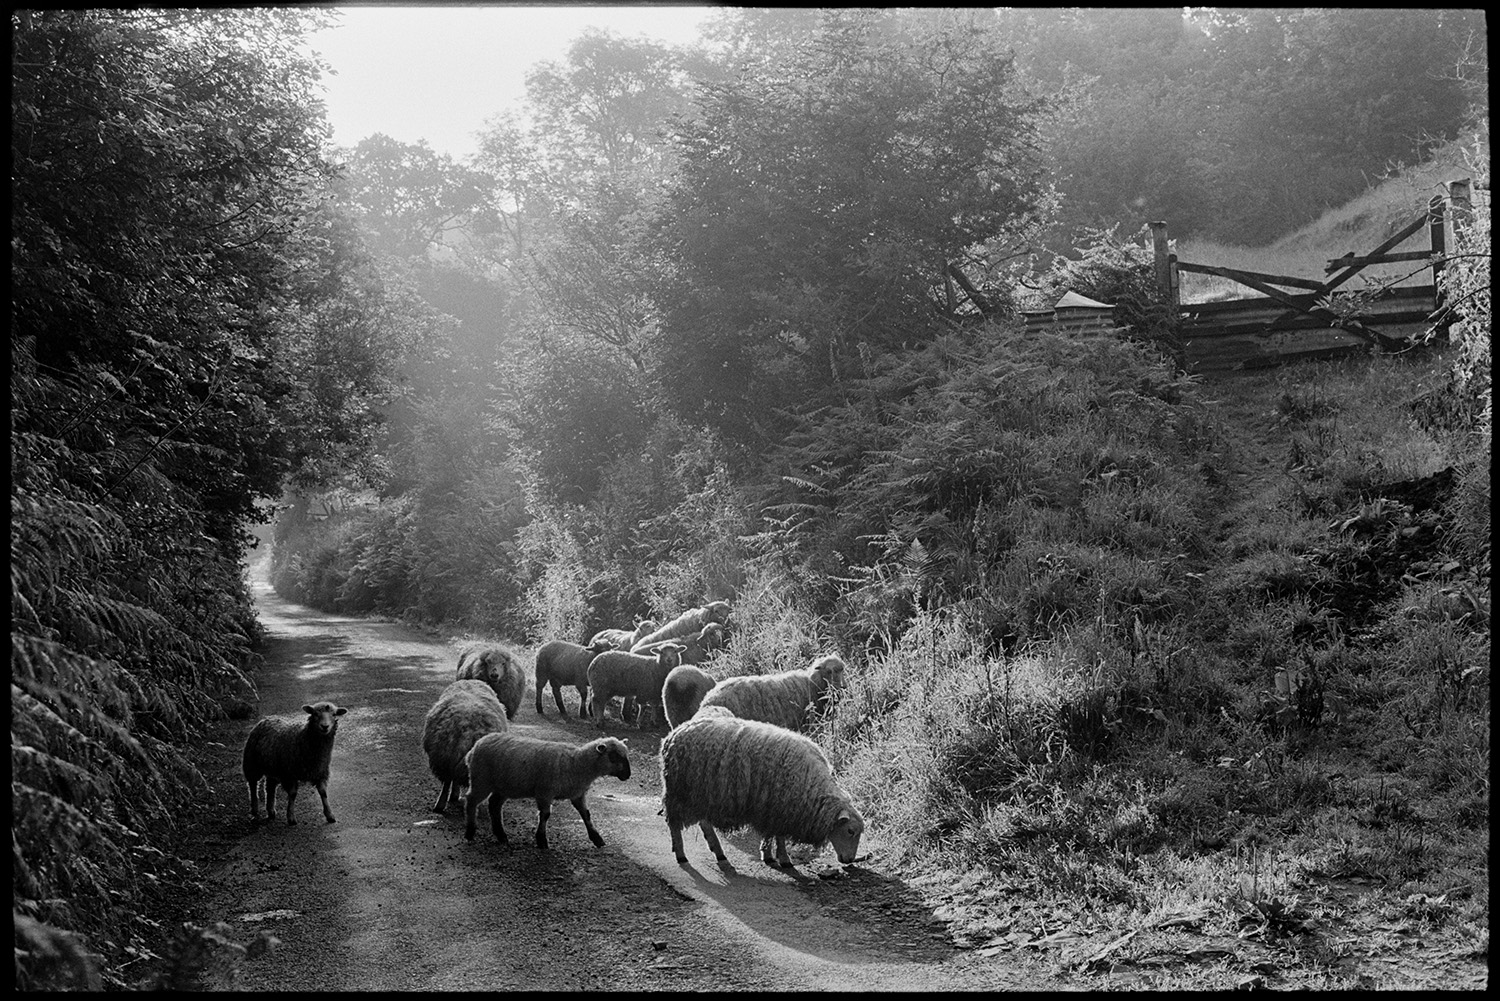 Lost sheep in sunlit lane with tall hedges, early morning, belong to Archie Parkhouse.
[A group of Archie Parkhouse's sheep, who have wandered on to a sunlit tree lined road, at Millhams, Dolton. They are grazing the grass on the verge. A track leading up to a broken five barred wooden field gate is visible by the roadside.]